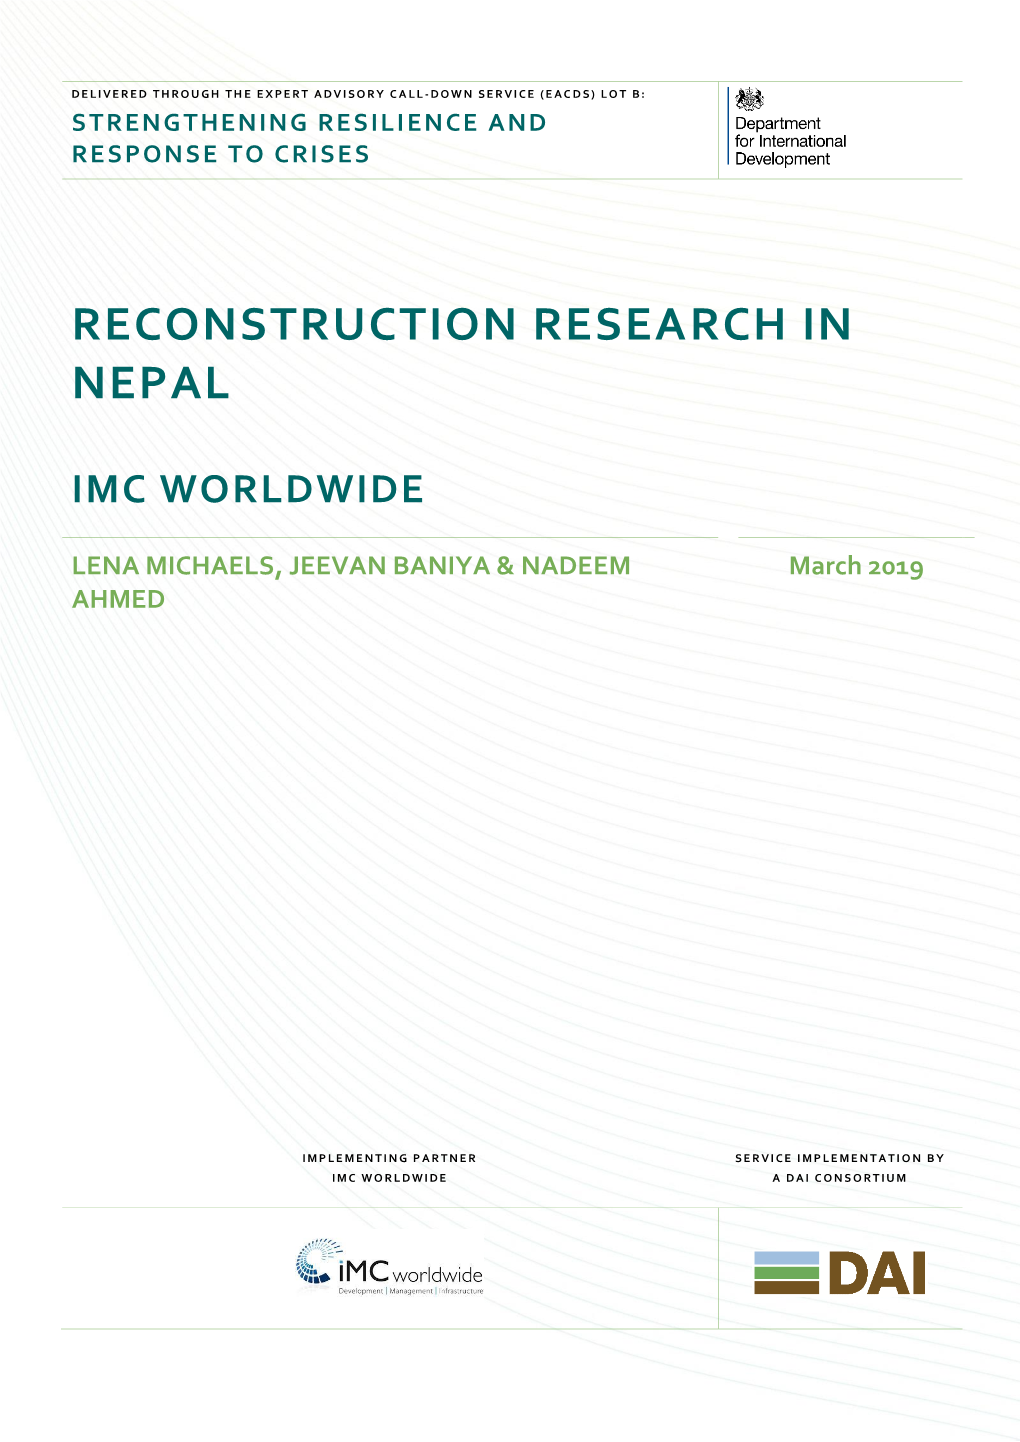 Nepal Earthquake Reconstruction Research: Scoping Study